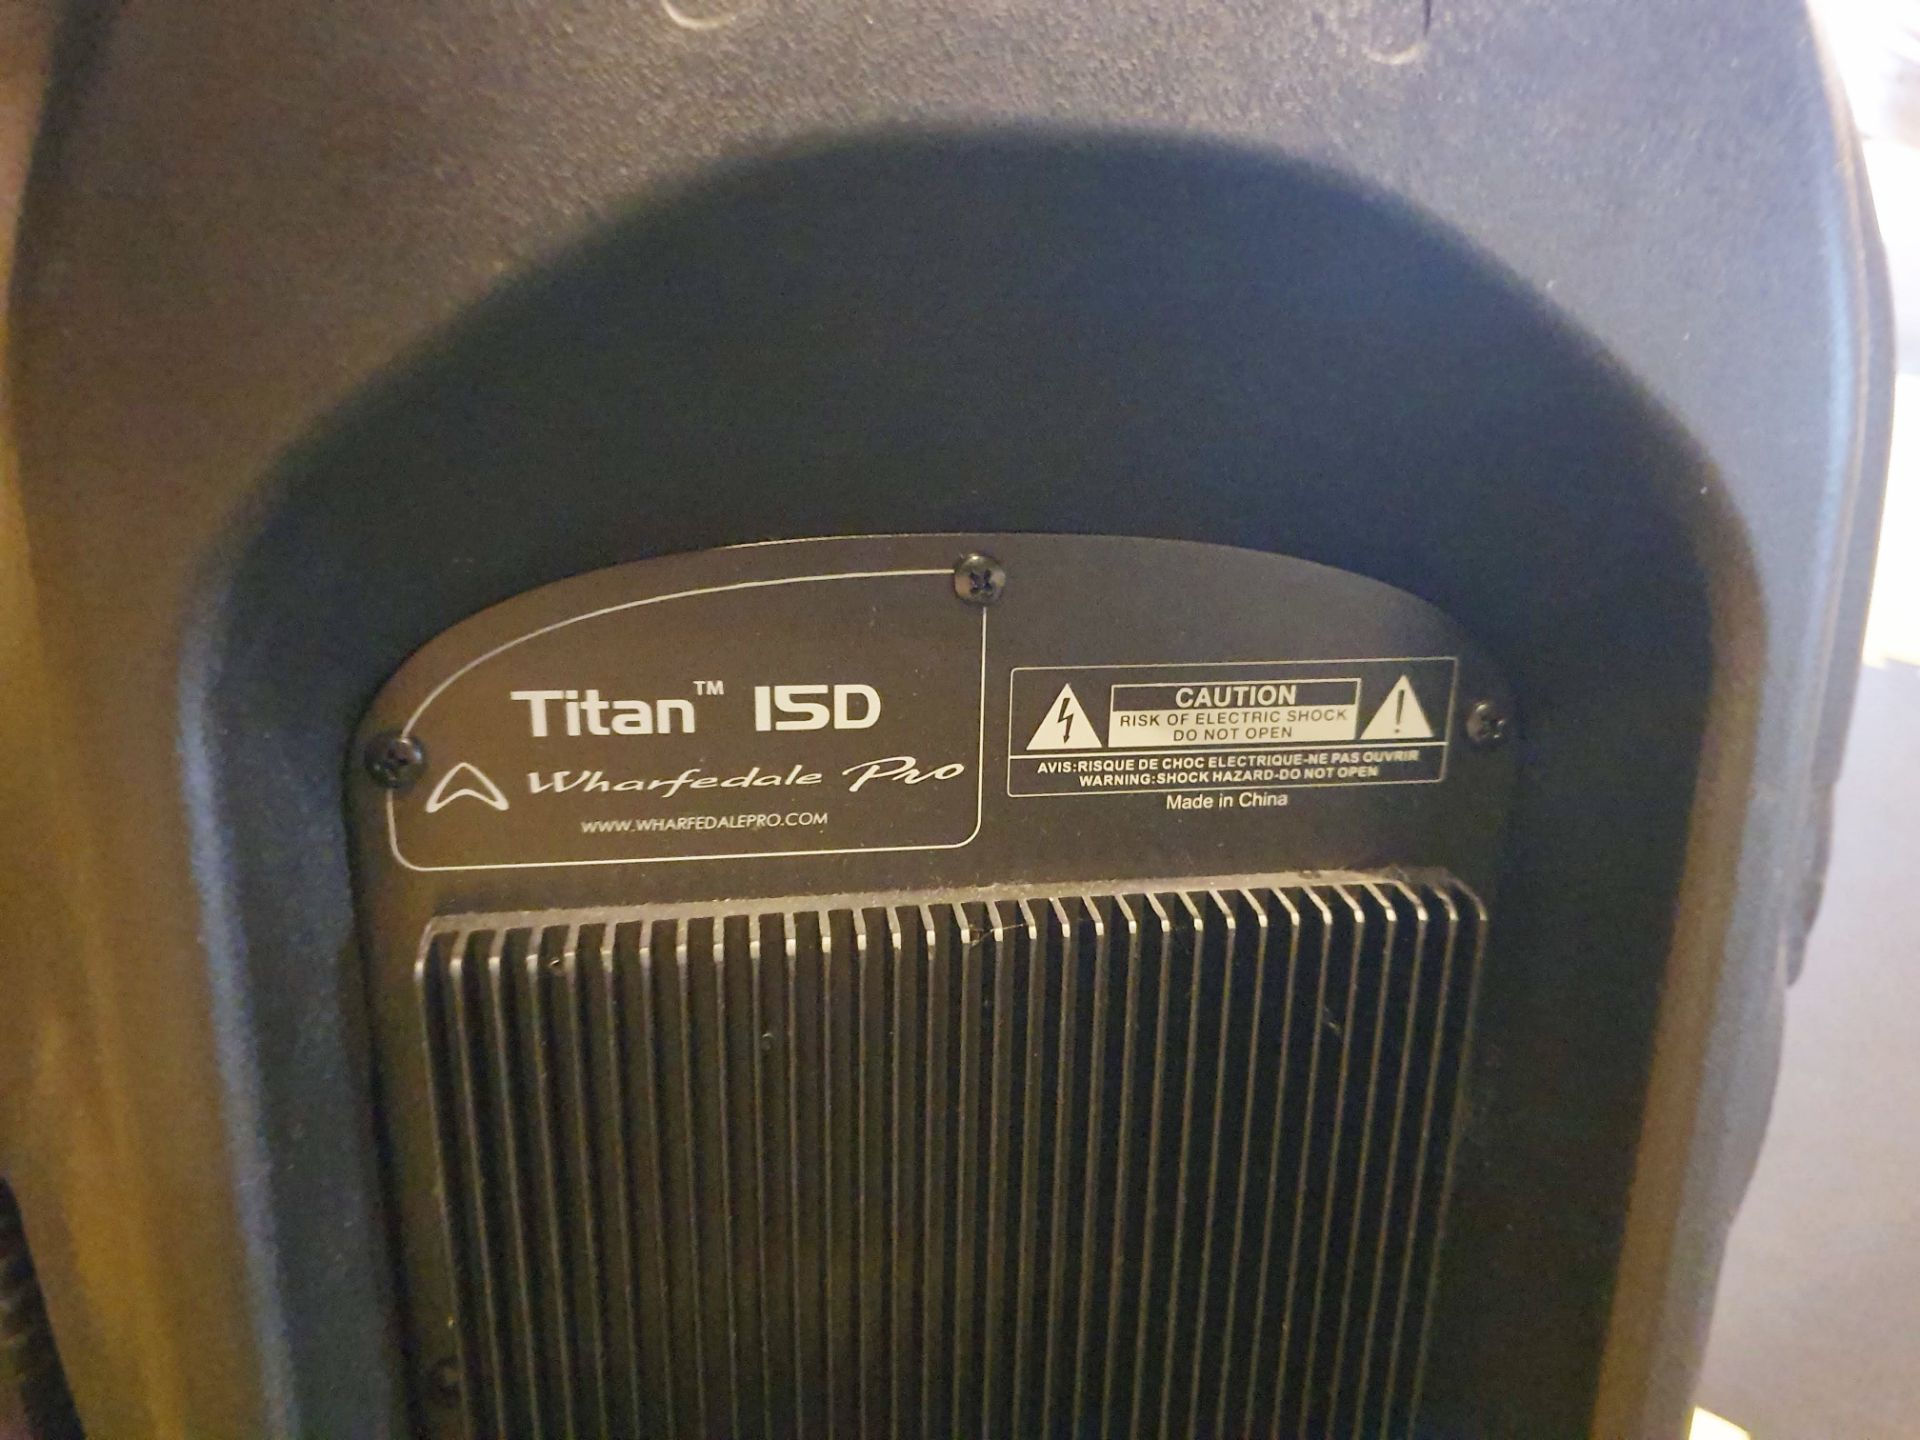 1 x Wharfdale Pro Titan 15D Active PA Speaker - RRP £250 - CL552 - Location: West Yorkshire - Image 4 of 4